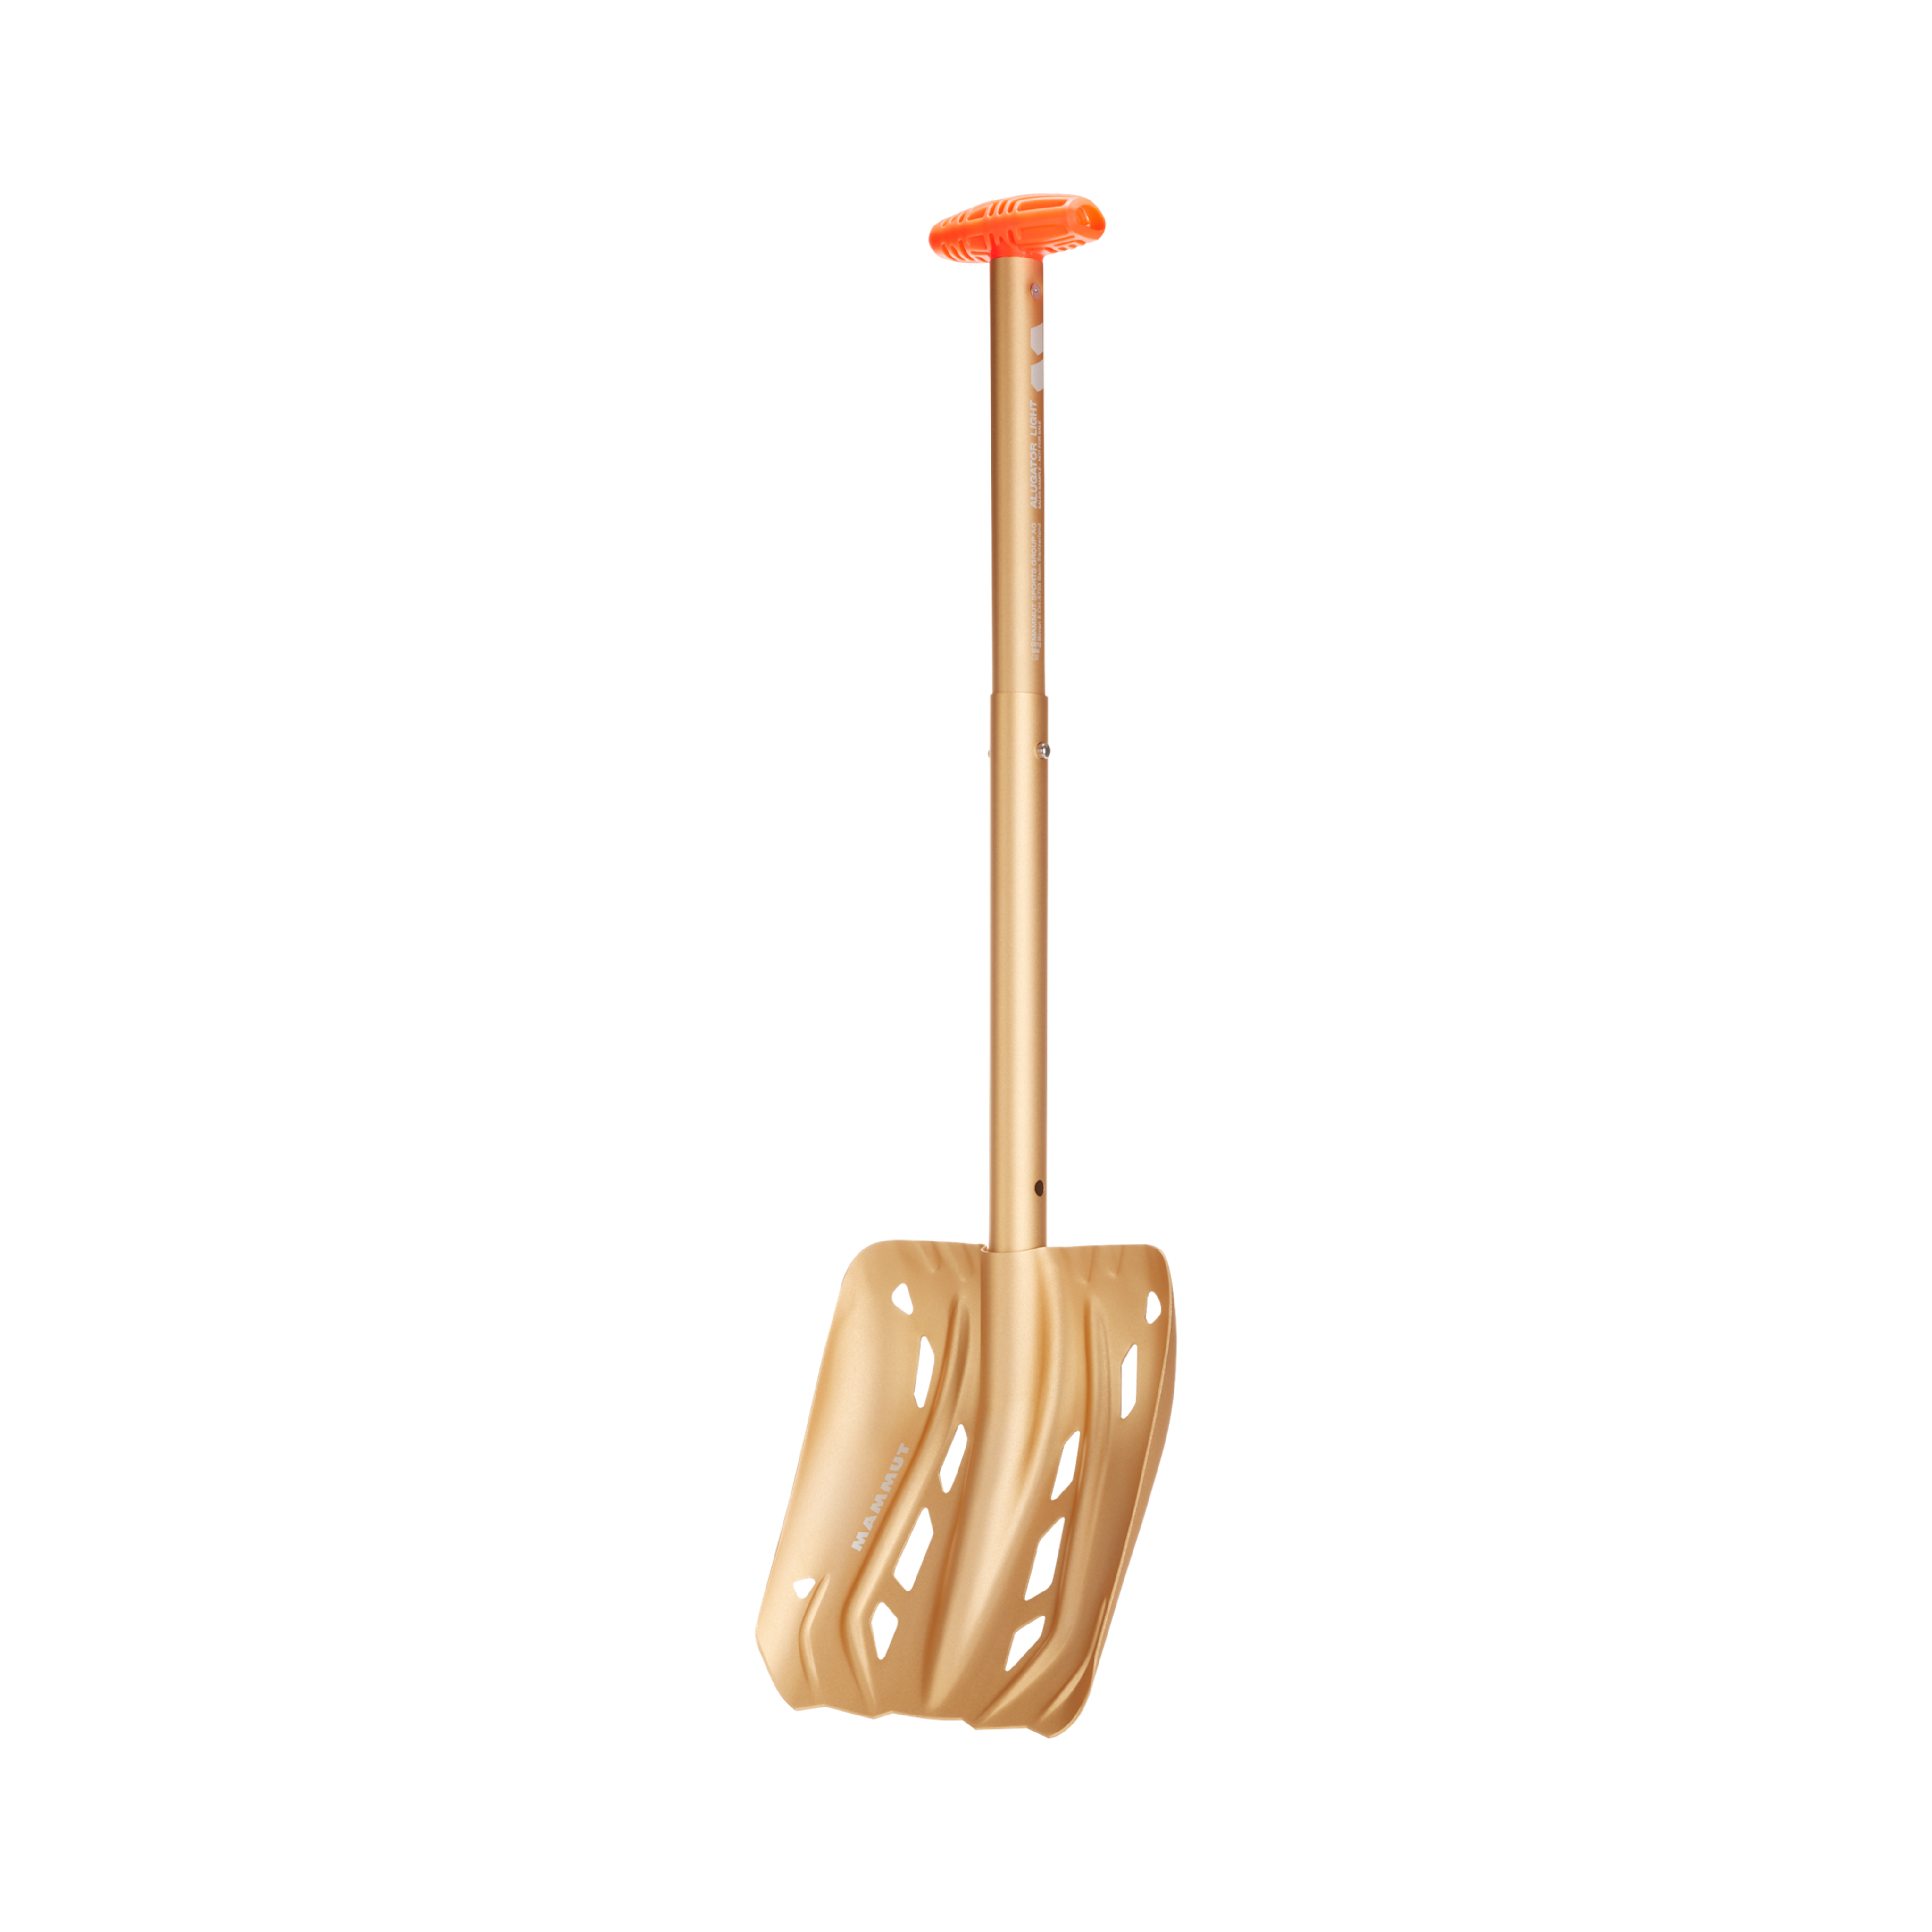 Mammut shovel for avalanche safety in the color gold